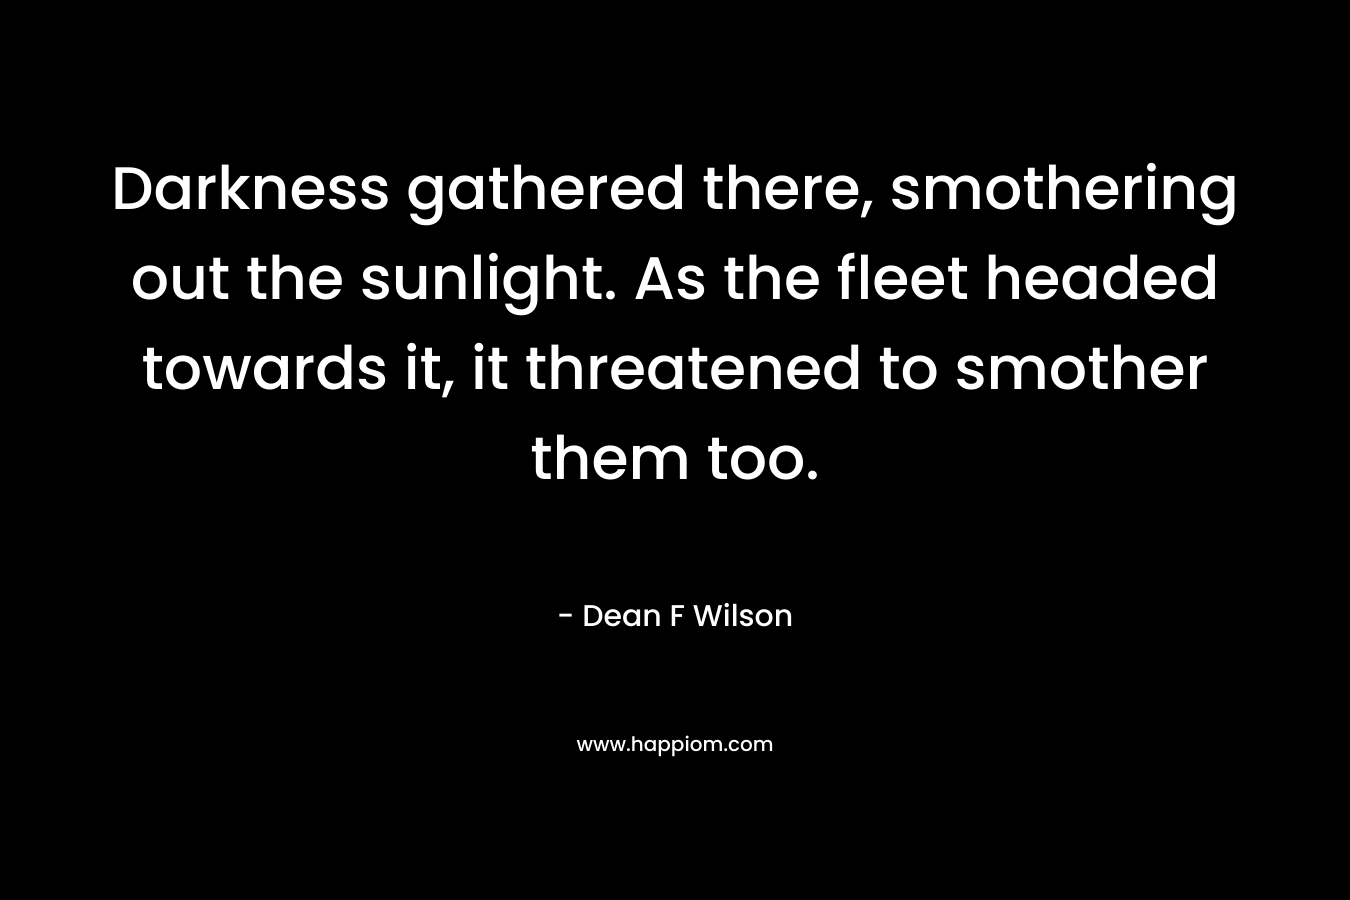 Darkness gathered there, smothering out the sunlight. As the fleet headed towards it, it threatened to smother them too. – Dean F Wilson